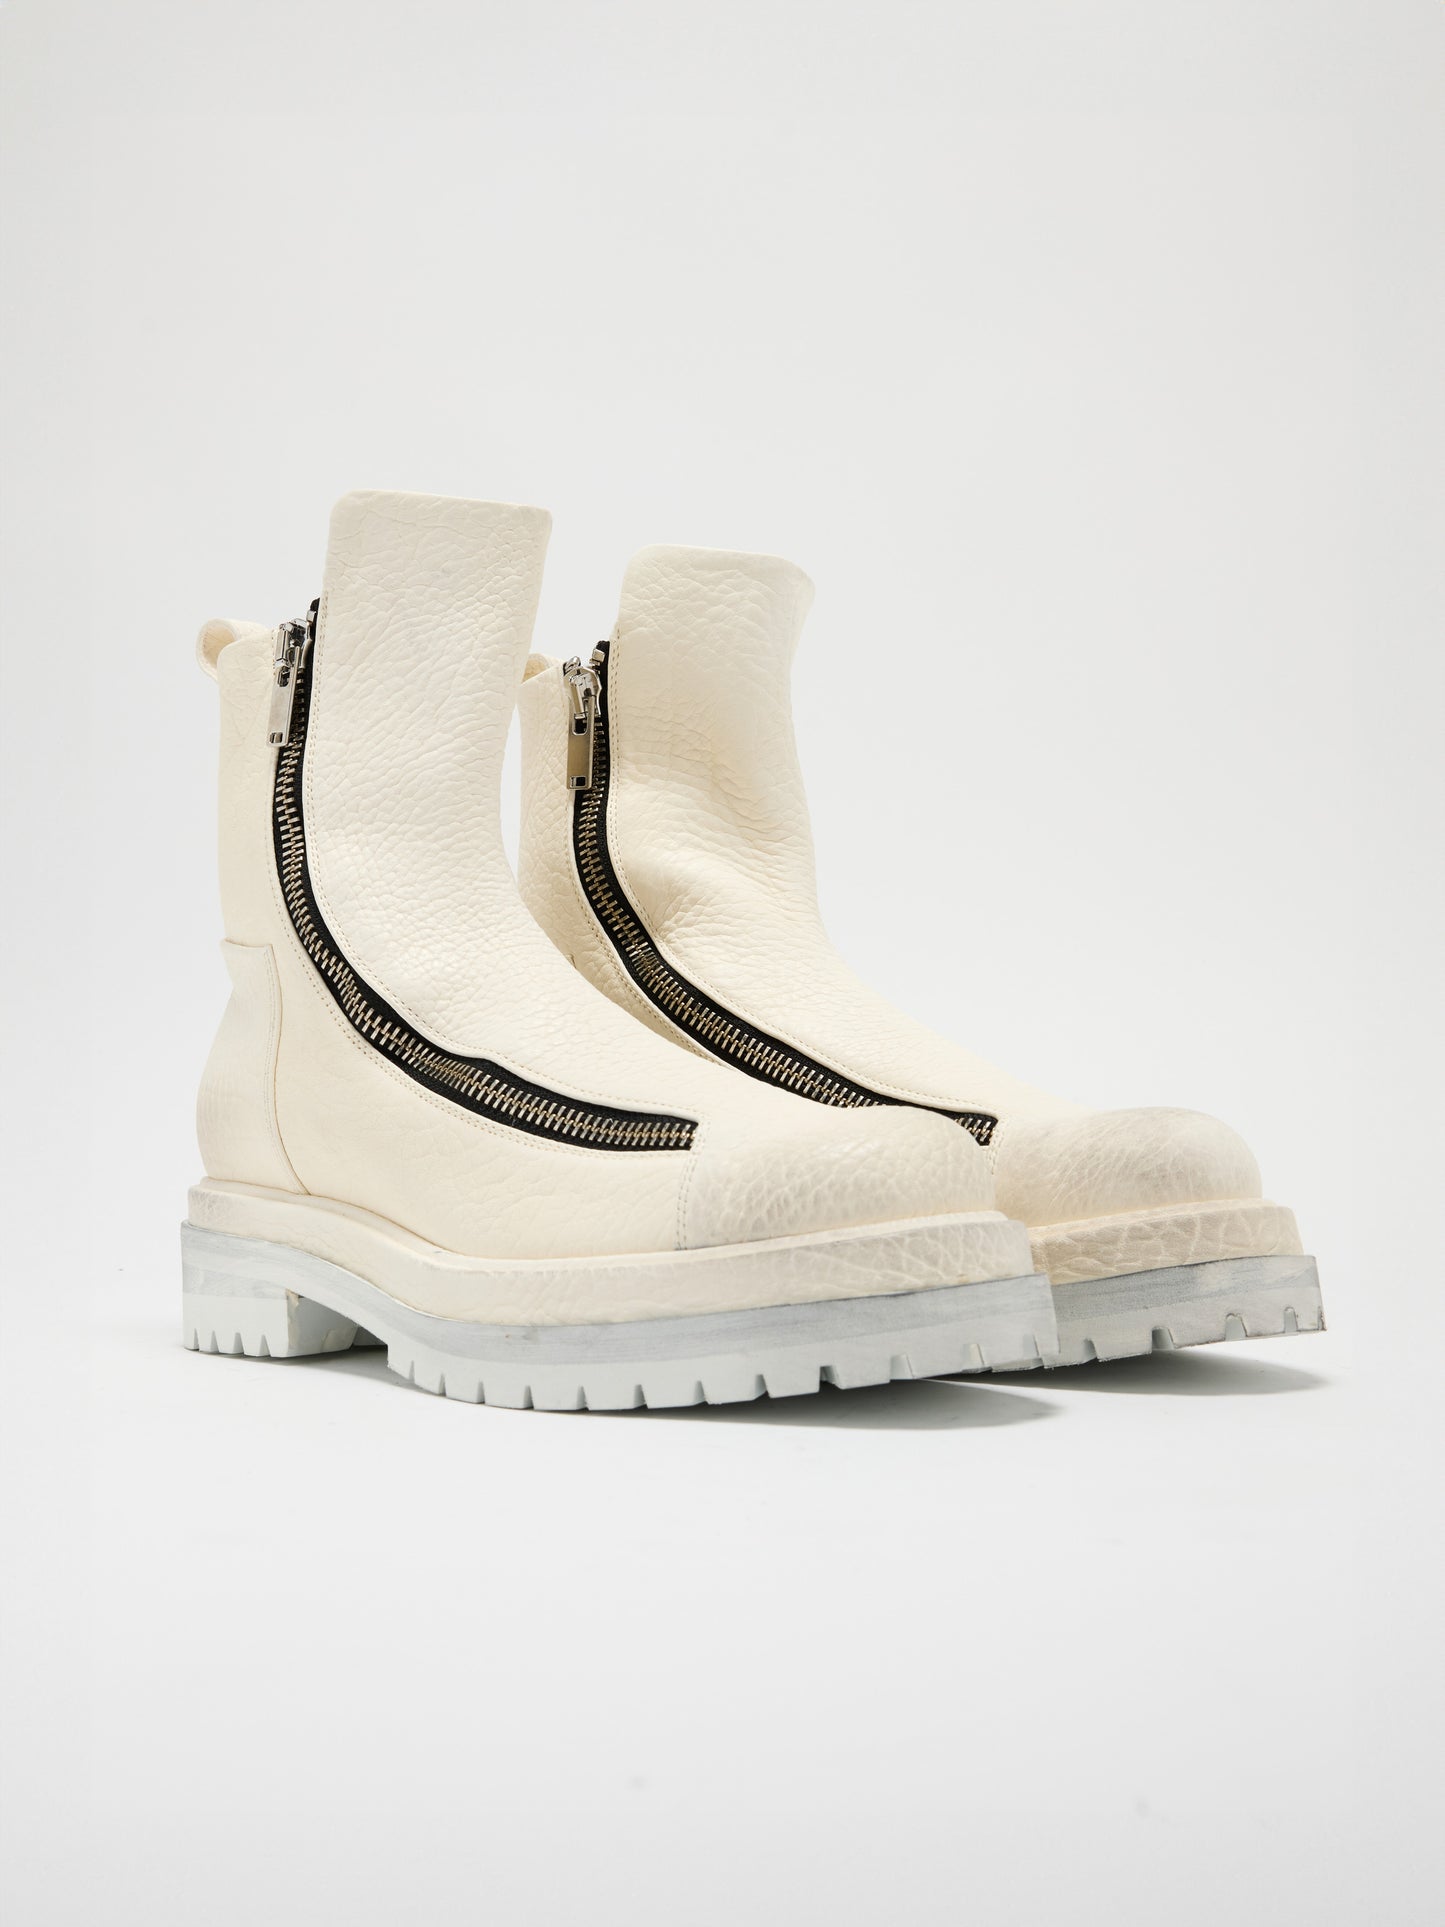 Double-Zipper Boots in White